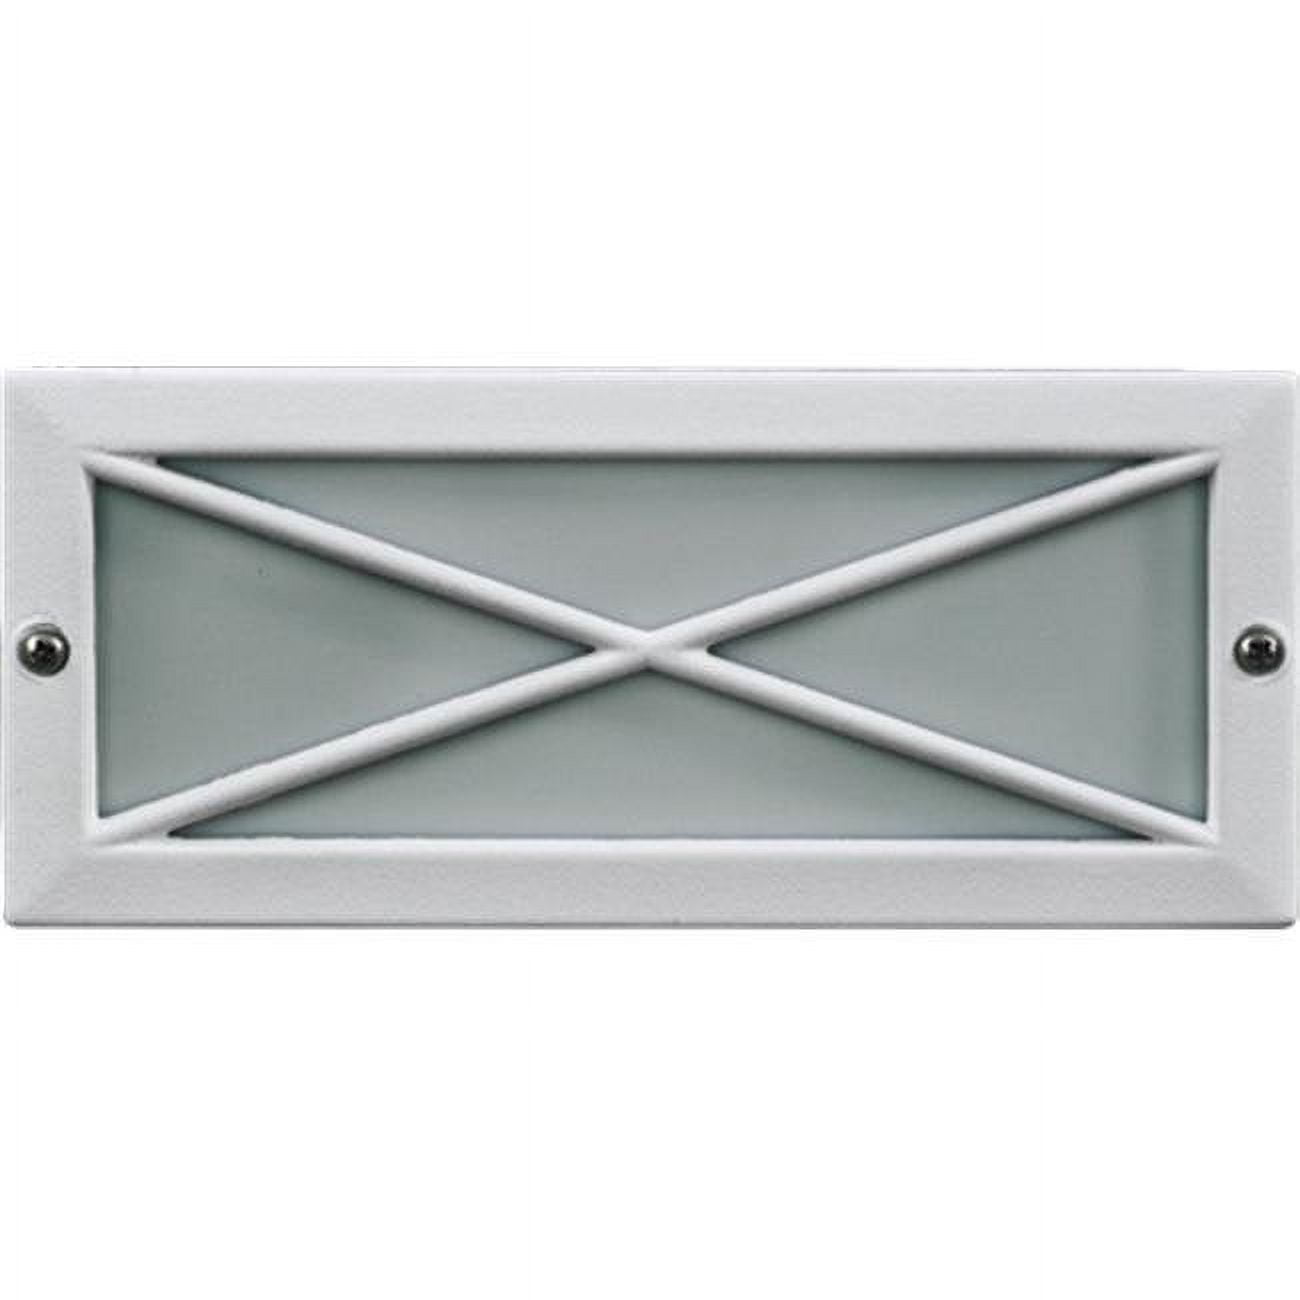 Picture of Dabmar Lighting LV635-W Cast Aluminum Recessed Brick, Step & Wall Light, White - 4 x 9.13 x 3.25 in.